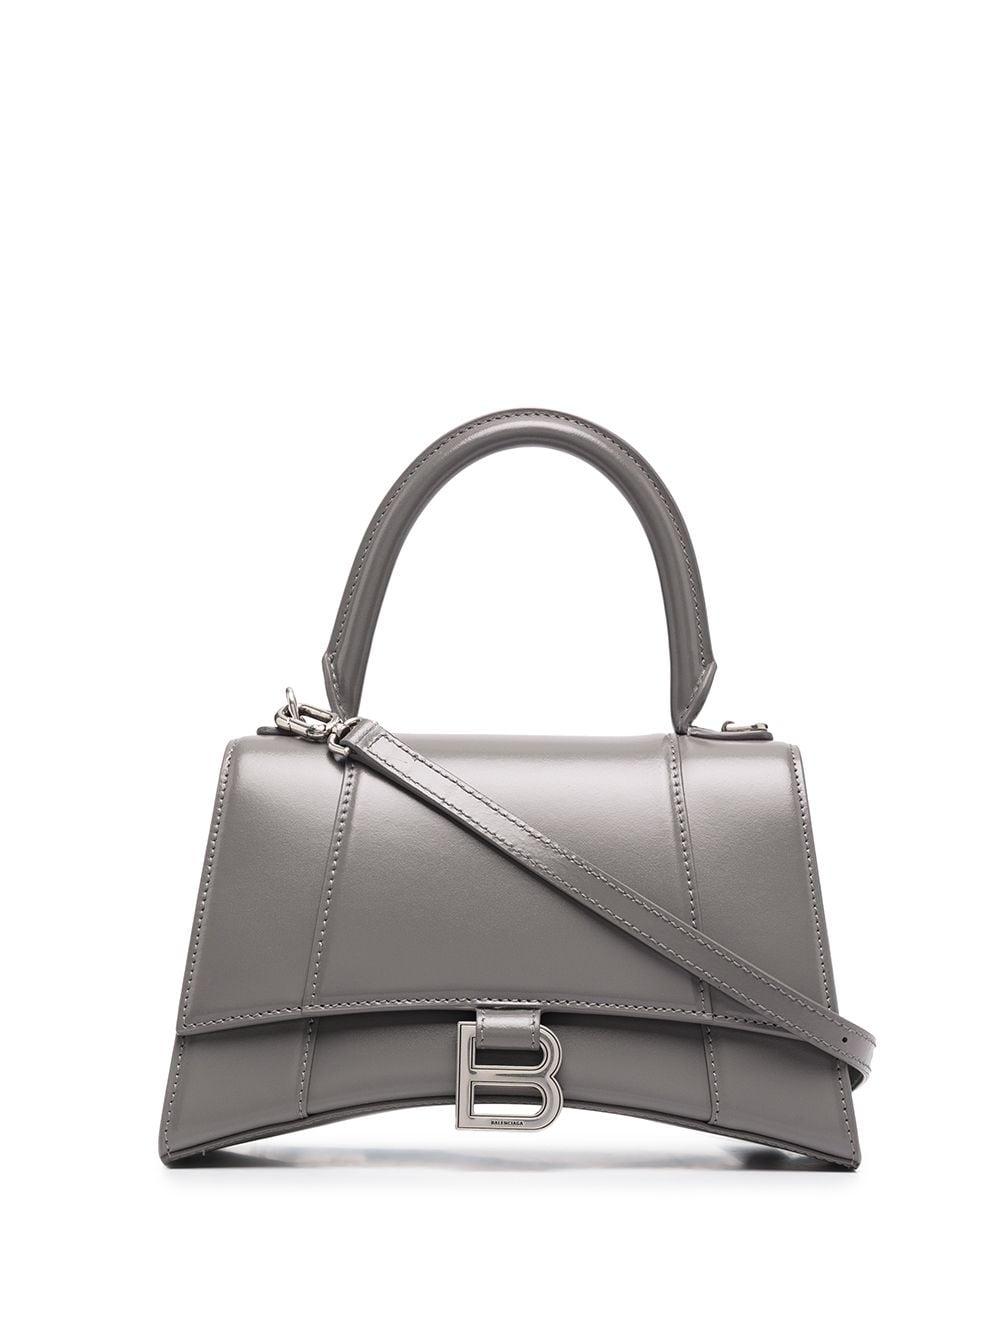 Balenciaga Leather Small Hourglass Tote Bag in Grey (Gray) - Lyst